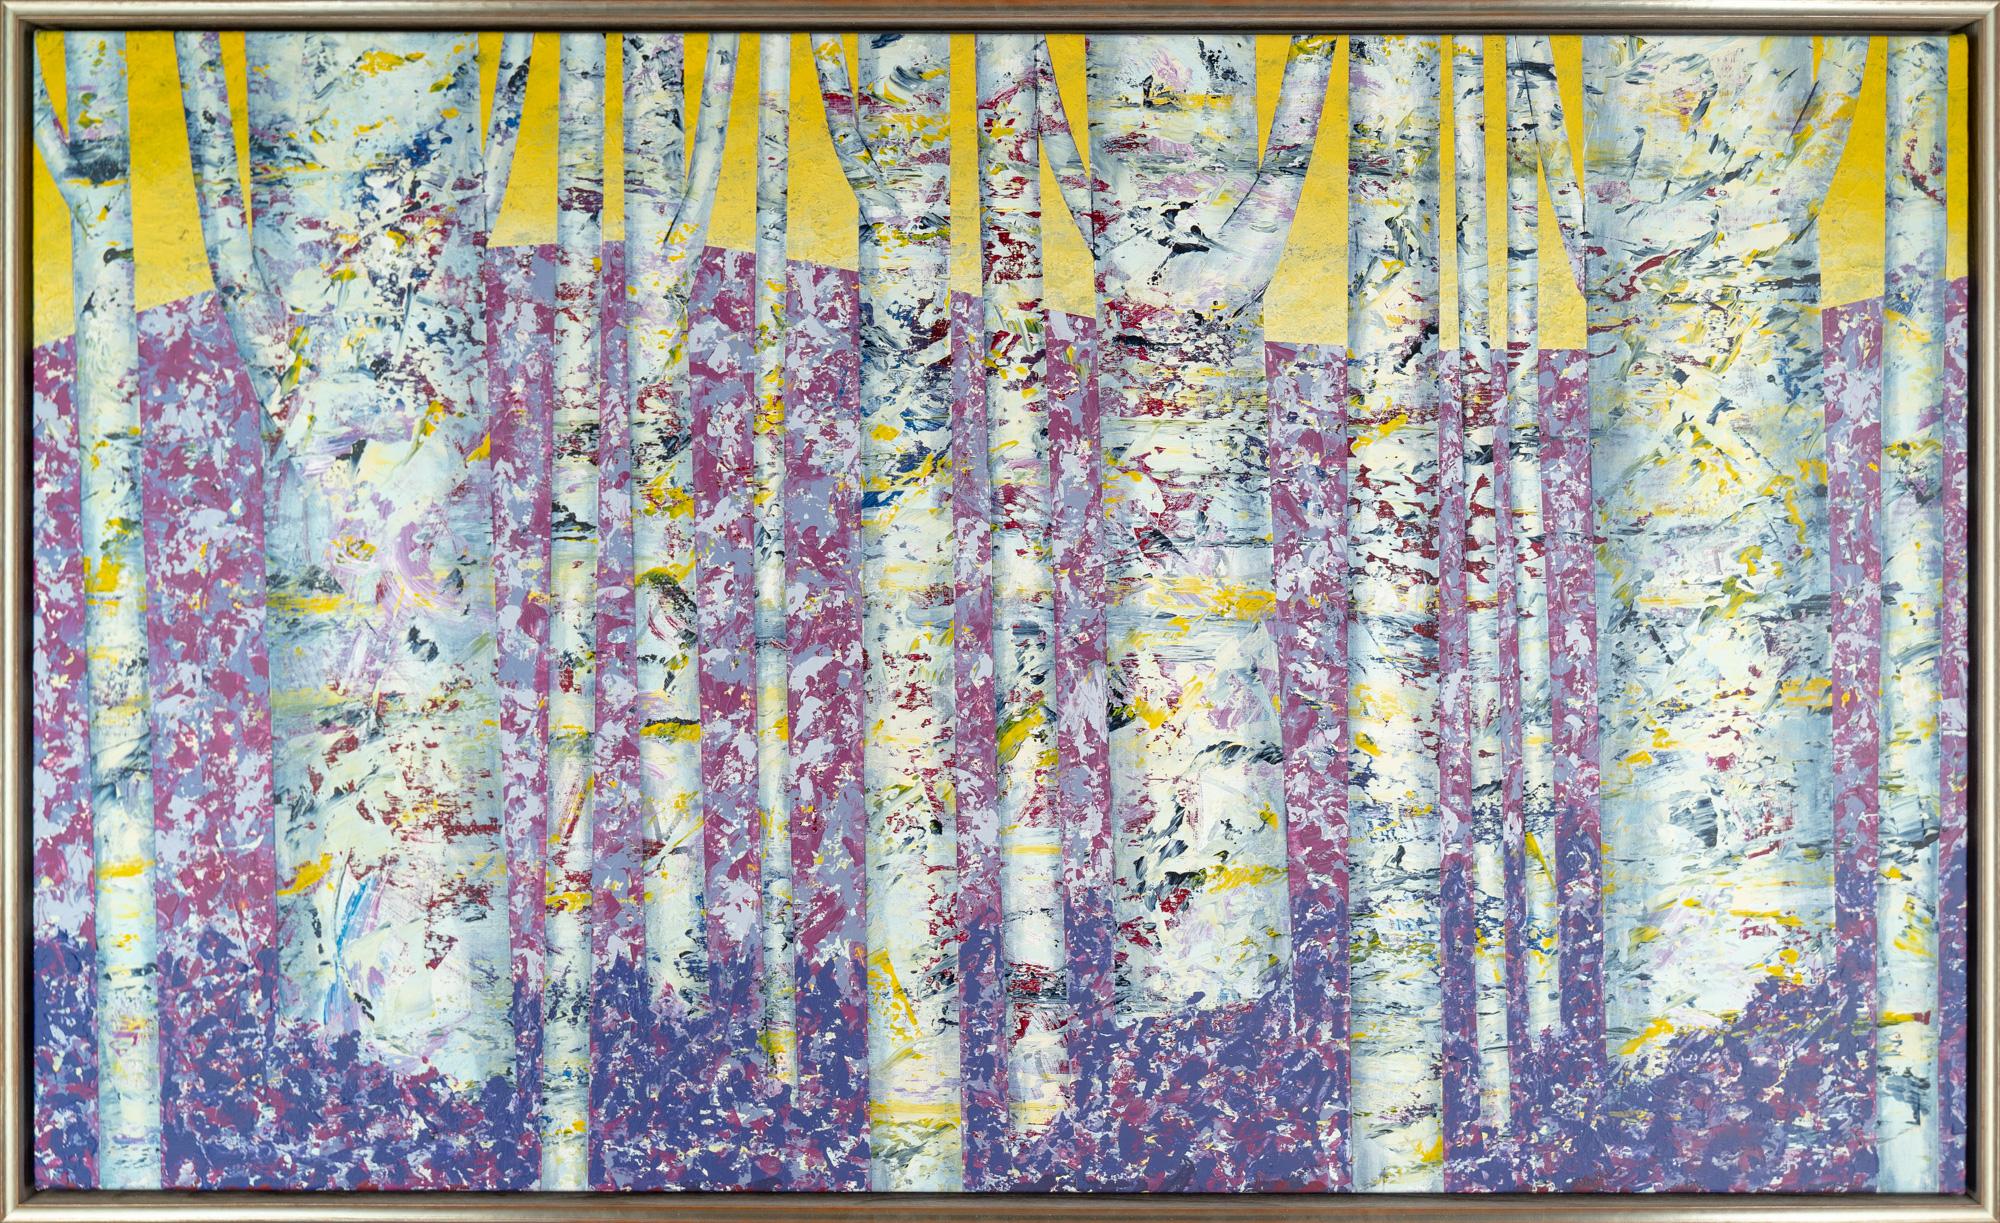 David Skillicorn Abstract Painting - "Nel Bosco 13-1" Framed Abstract Trees Landscape Mixed Media on Canvas Painting